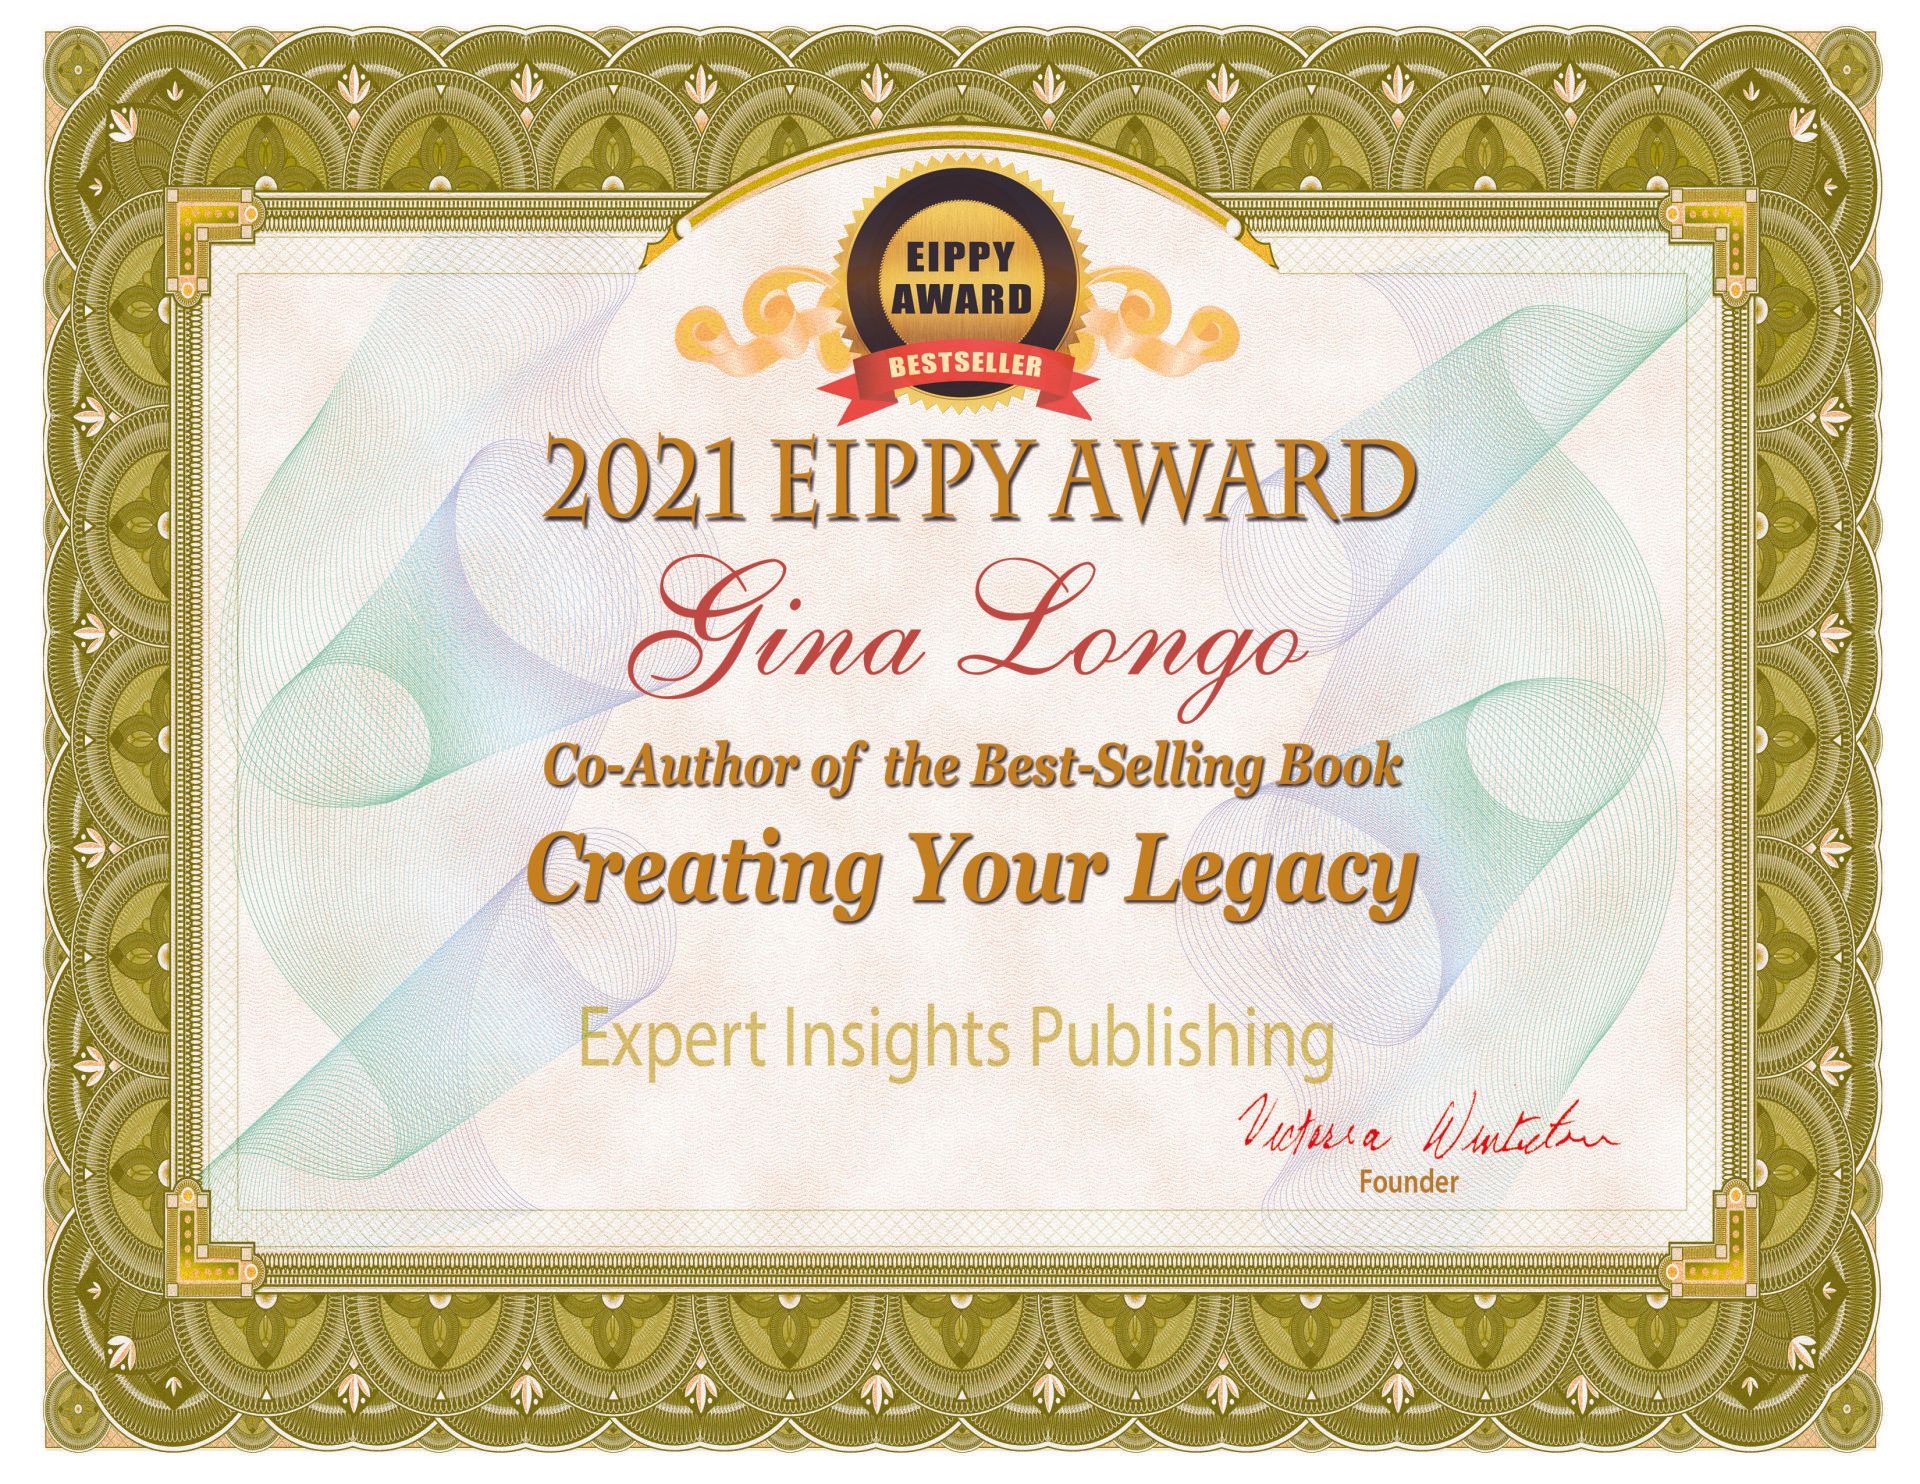 2021 EIPPY Award Certificate for Creating Your Legacy